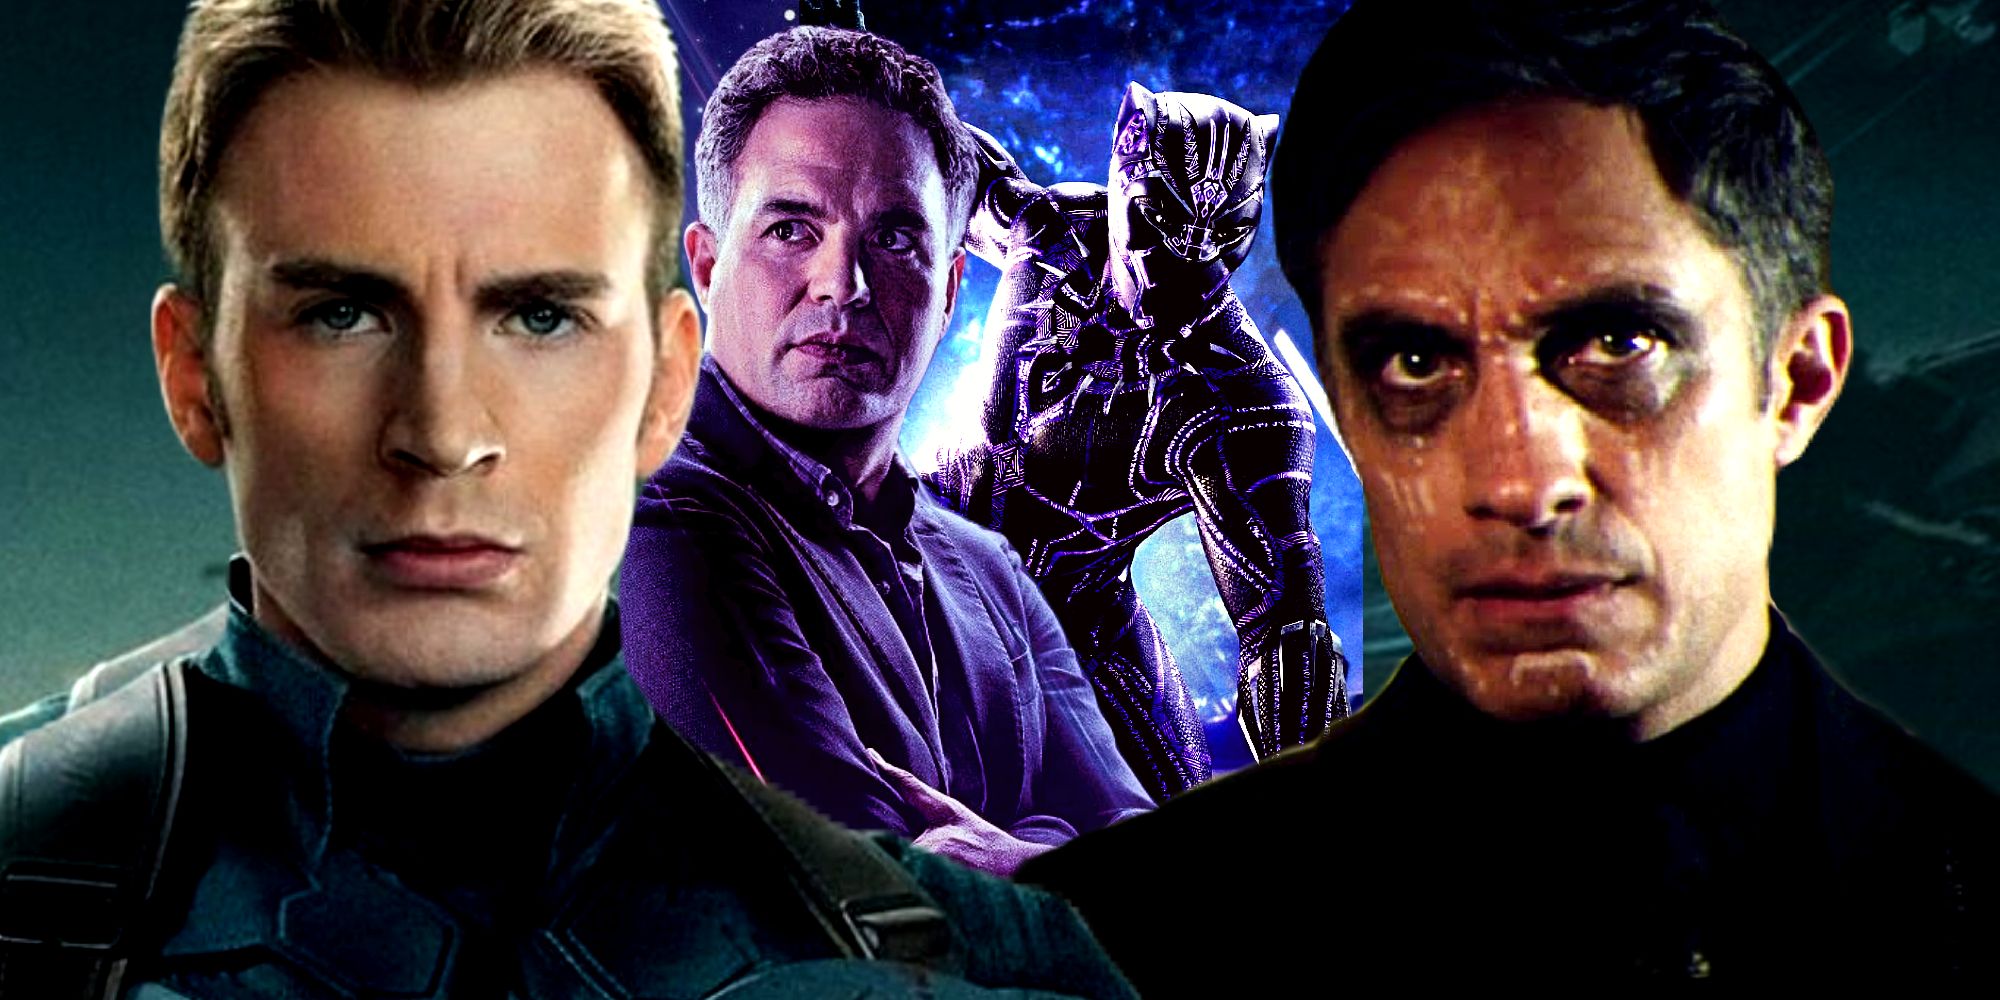 MCU Heroes Steve Rogers, Bruce Banner, Black Panther, and Werewolf by Night